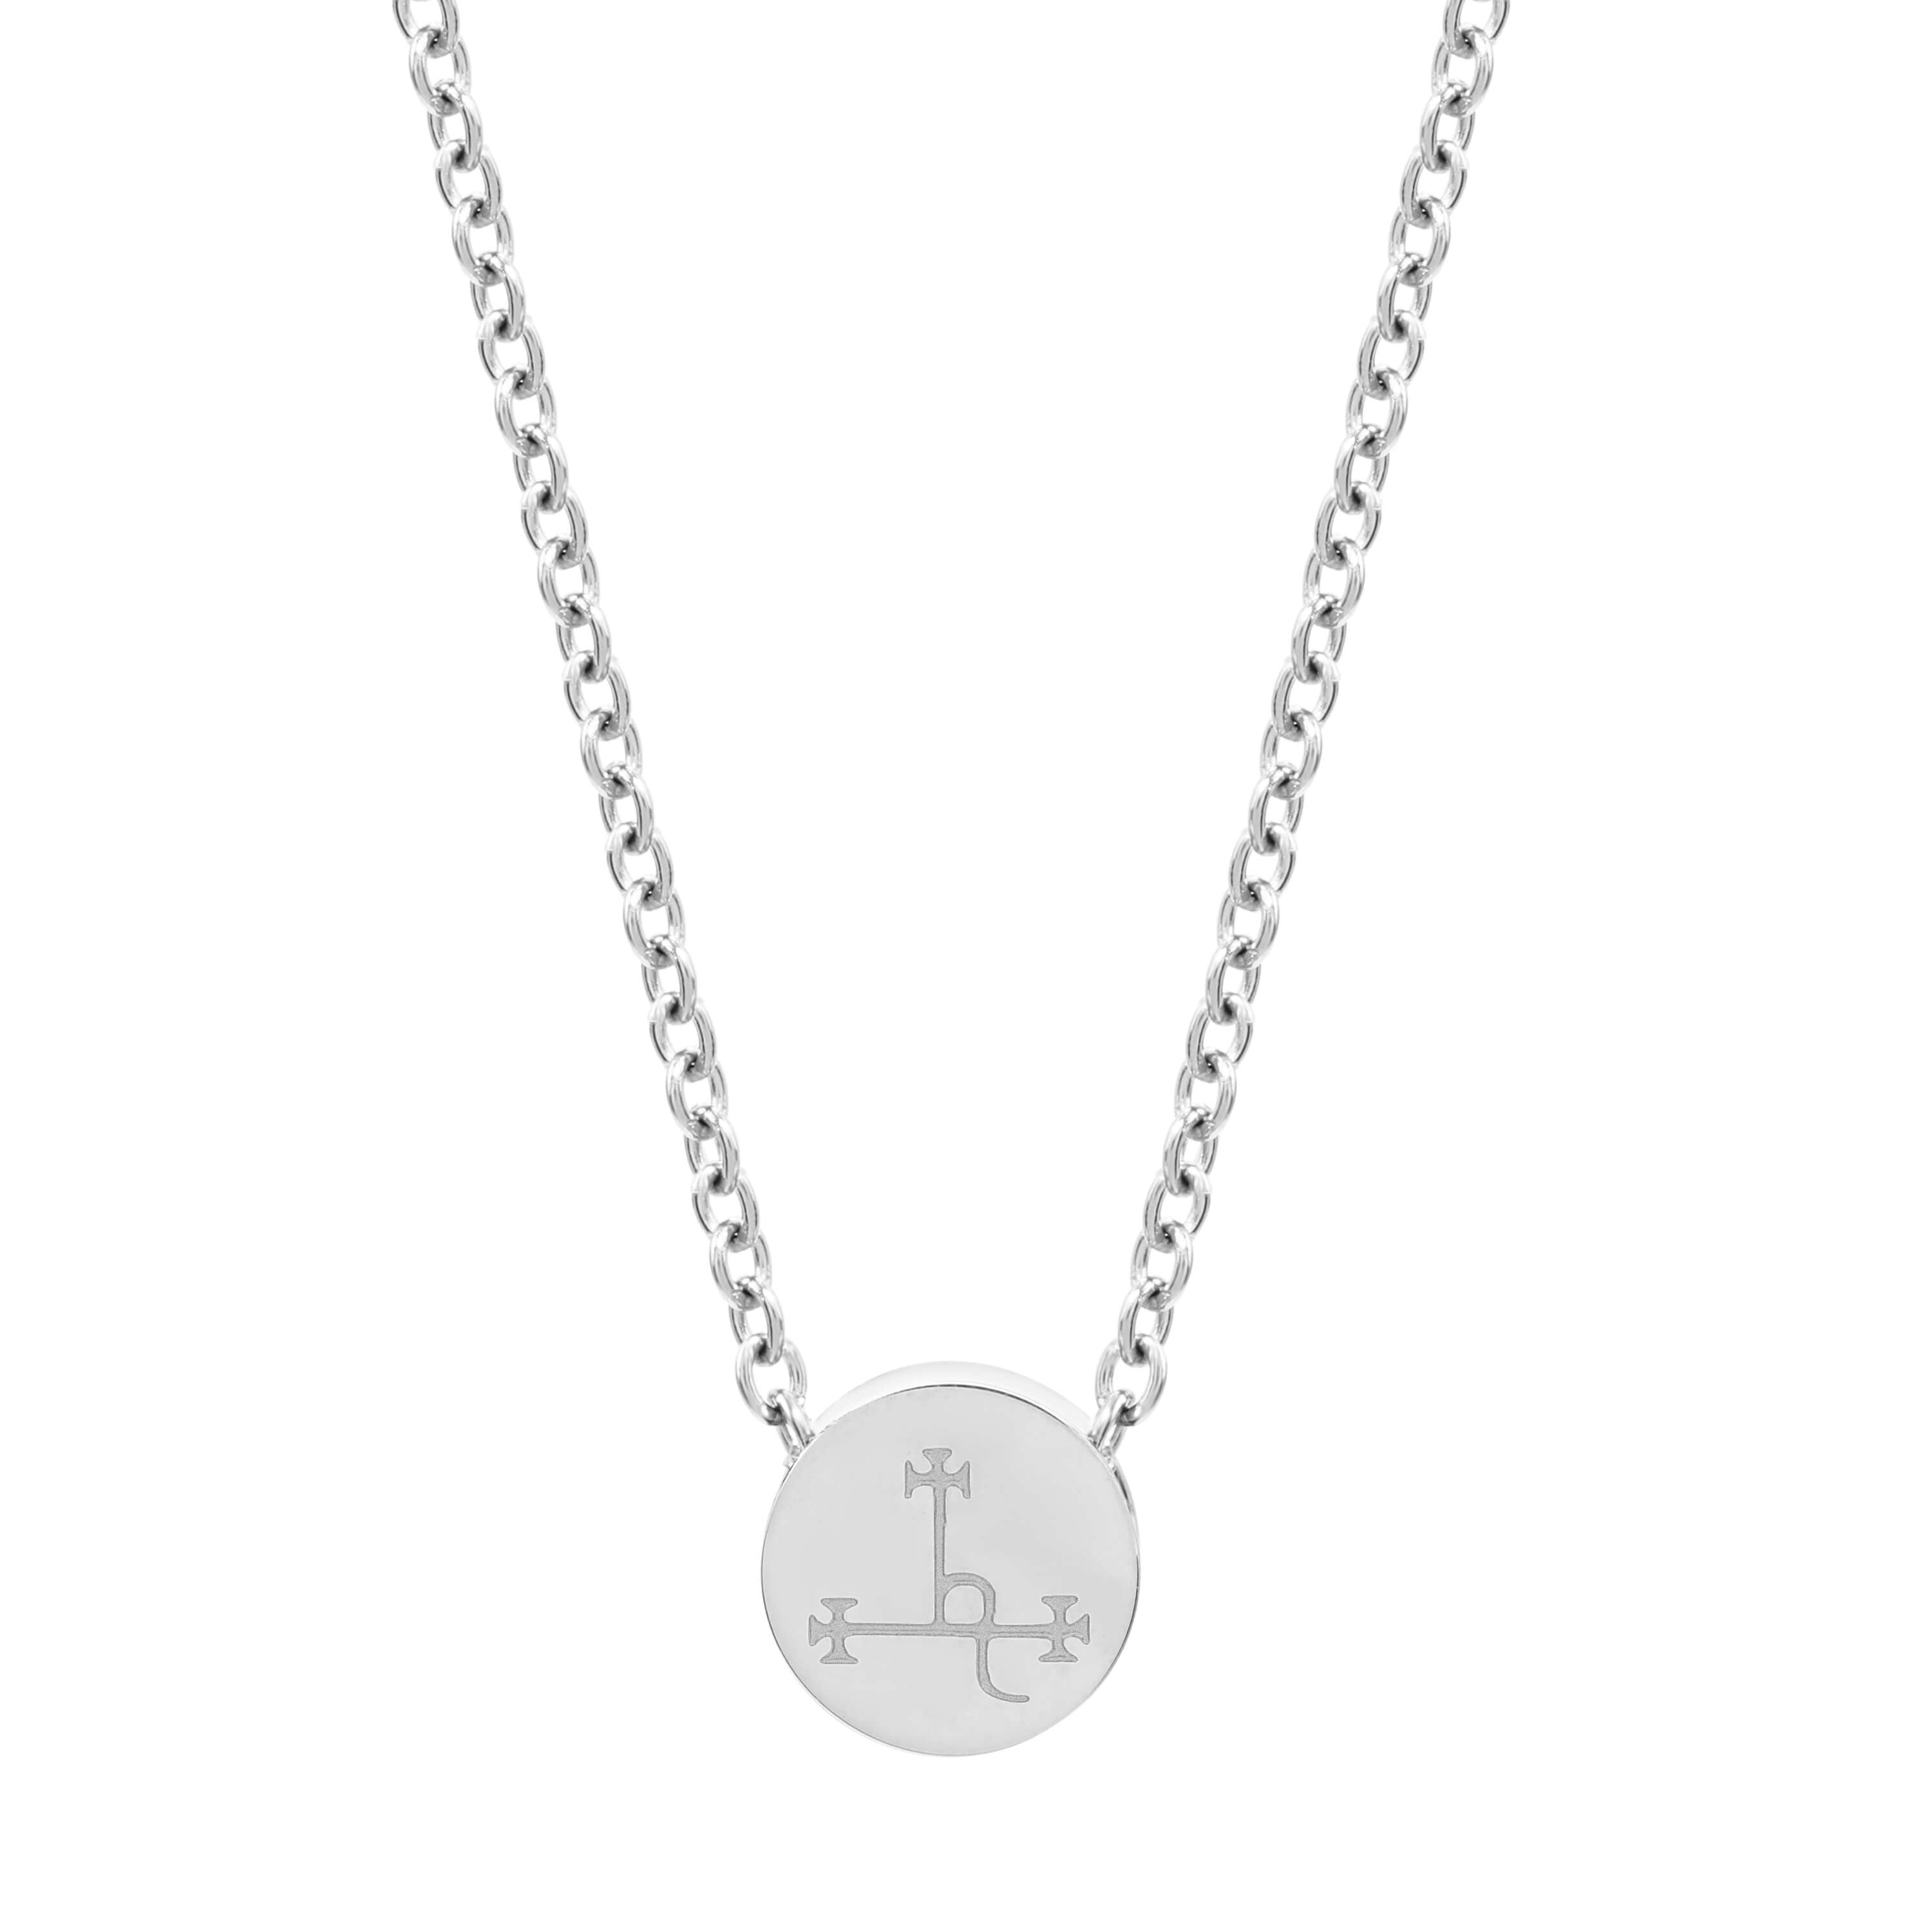 Lilith Sigil Mini Pendant Necklace (Stainless Steel)